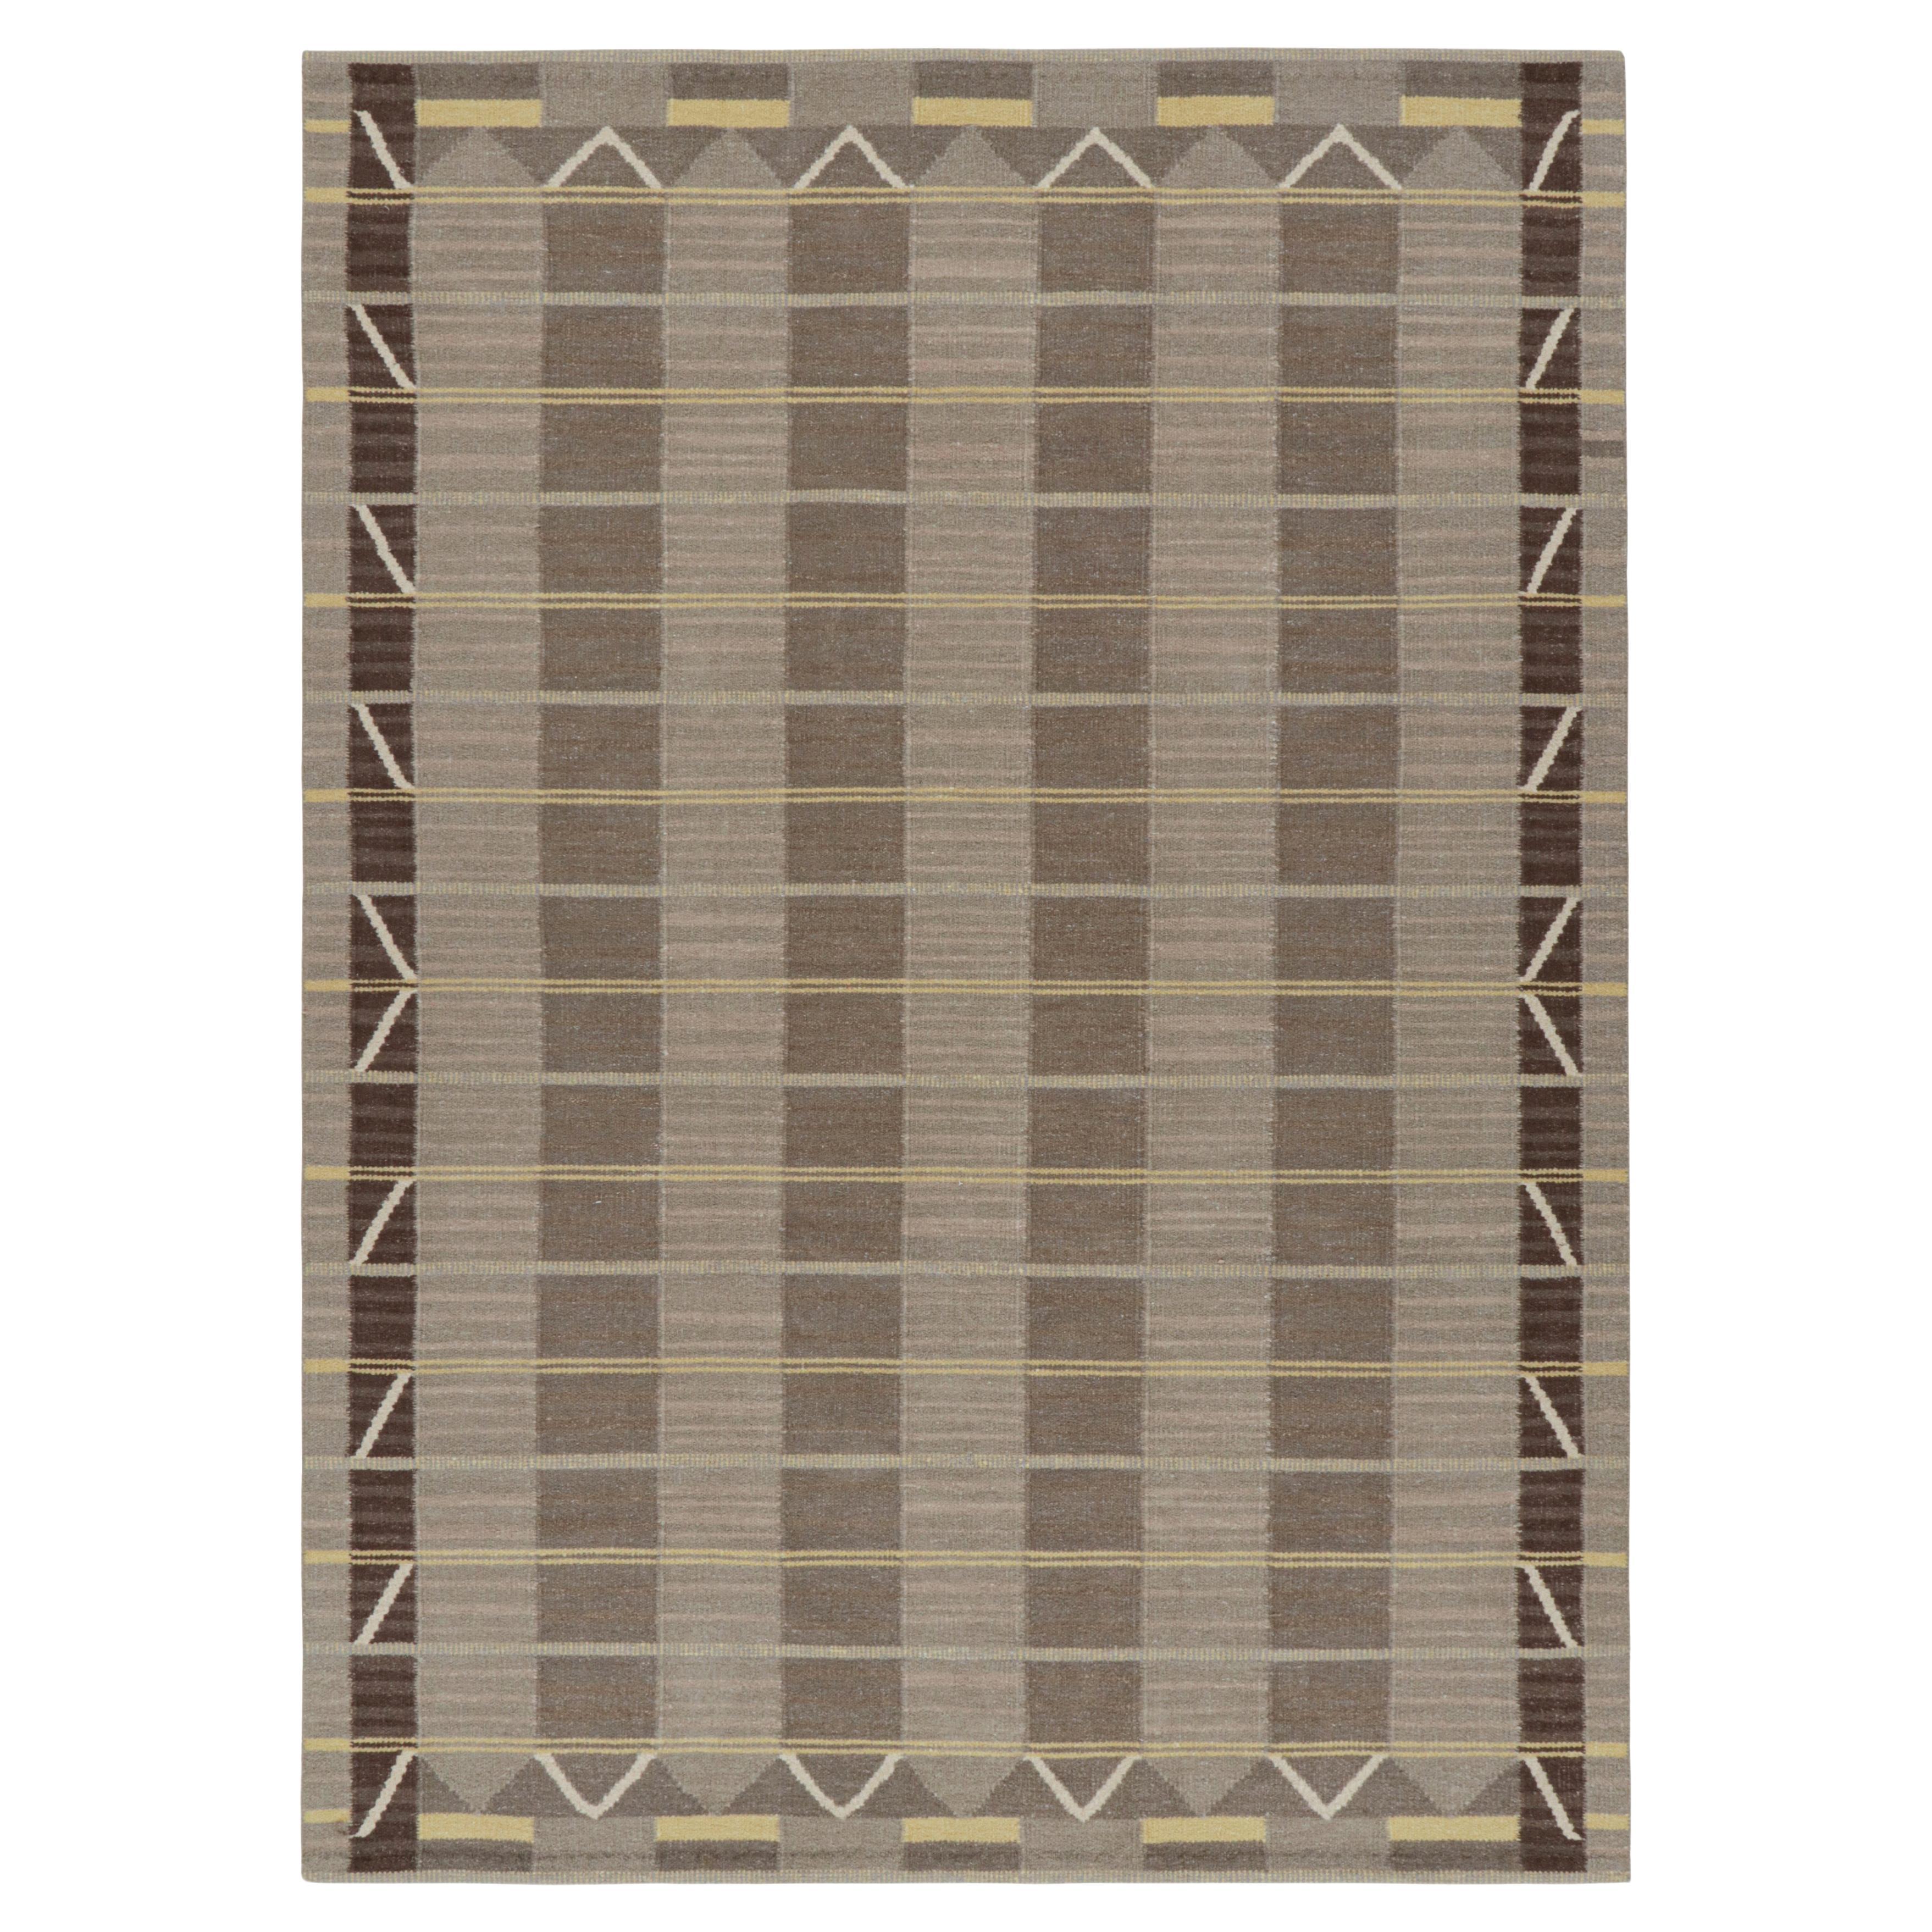 Rug & Kilim’s Scandinavian Style Rug in Beige-Brown with Geometric Patterns For Sale